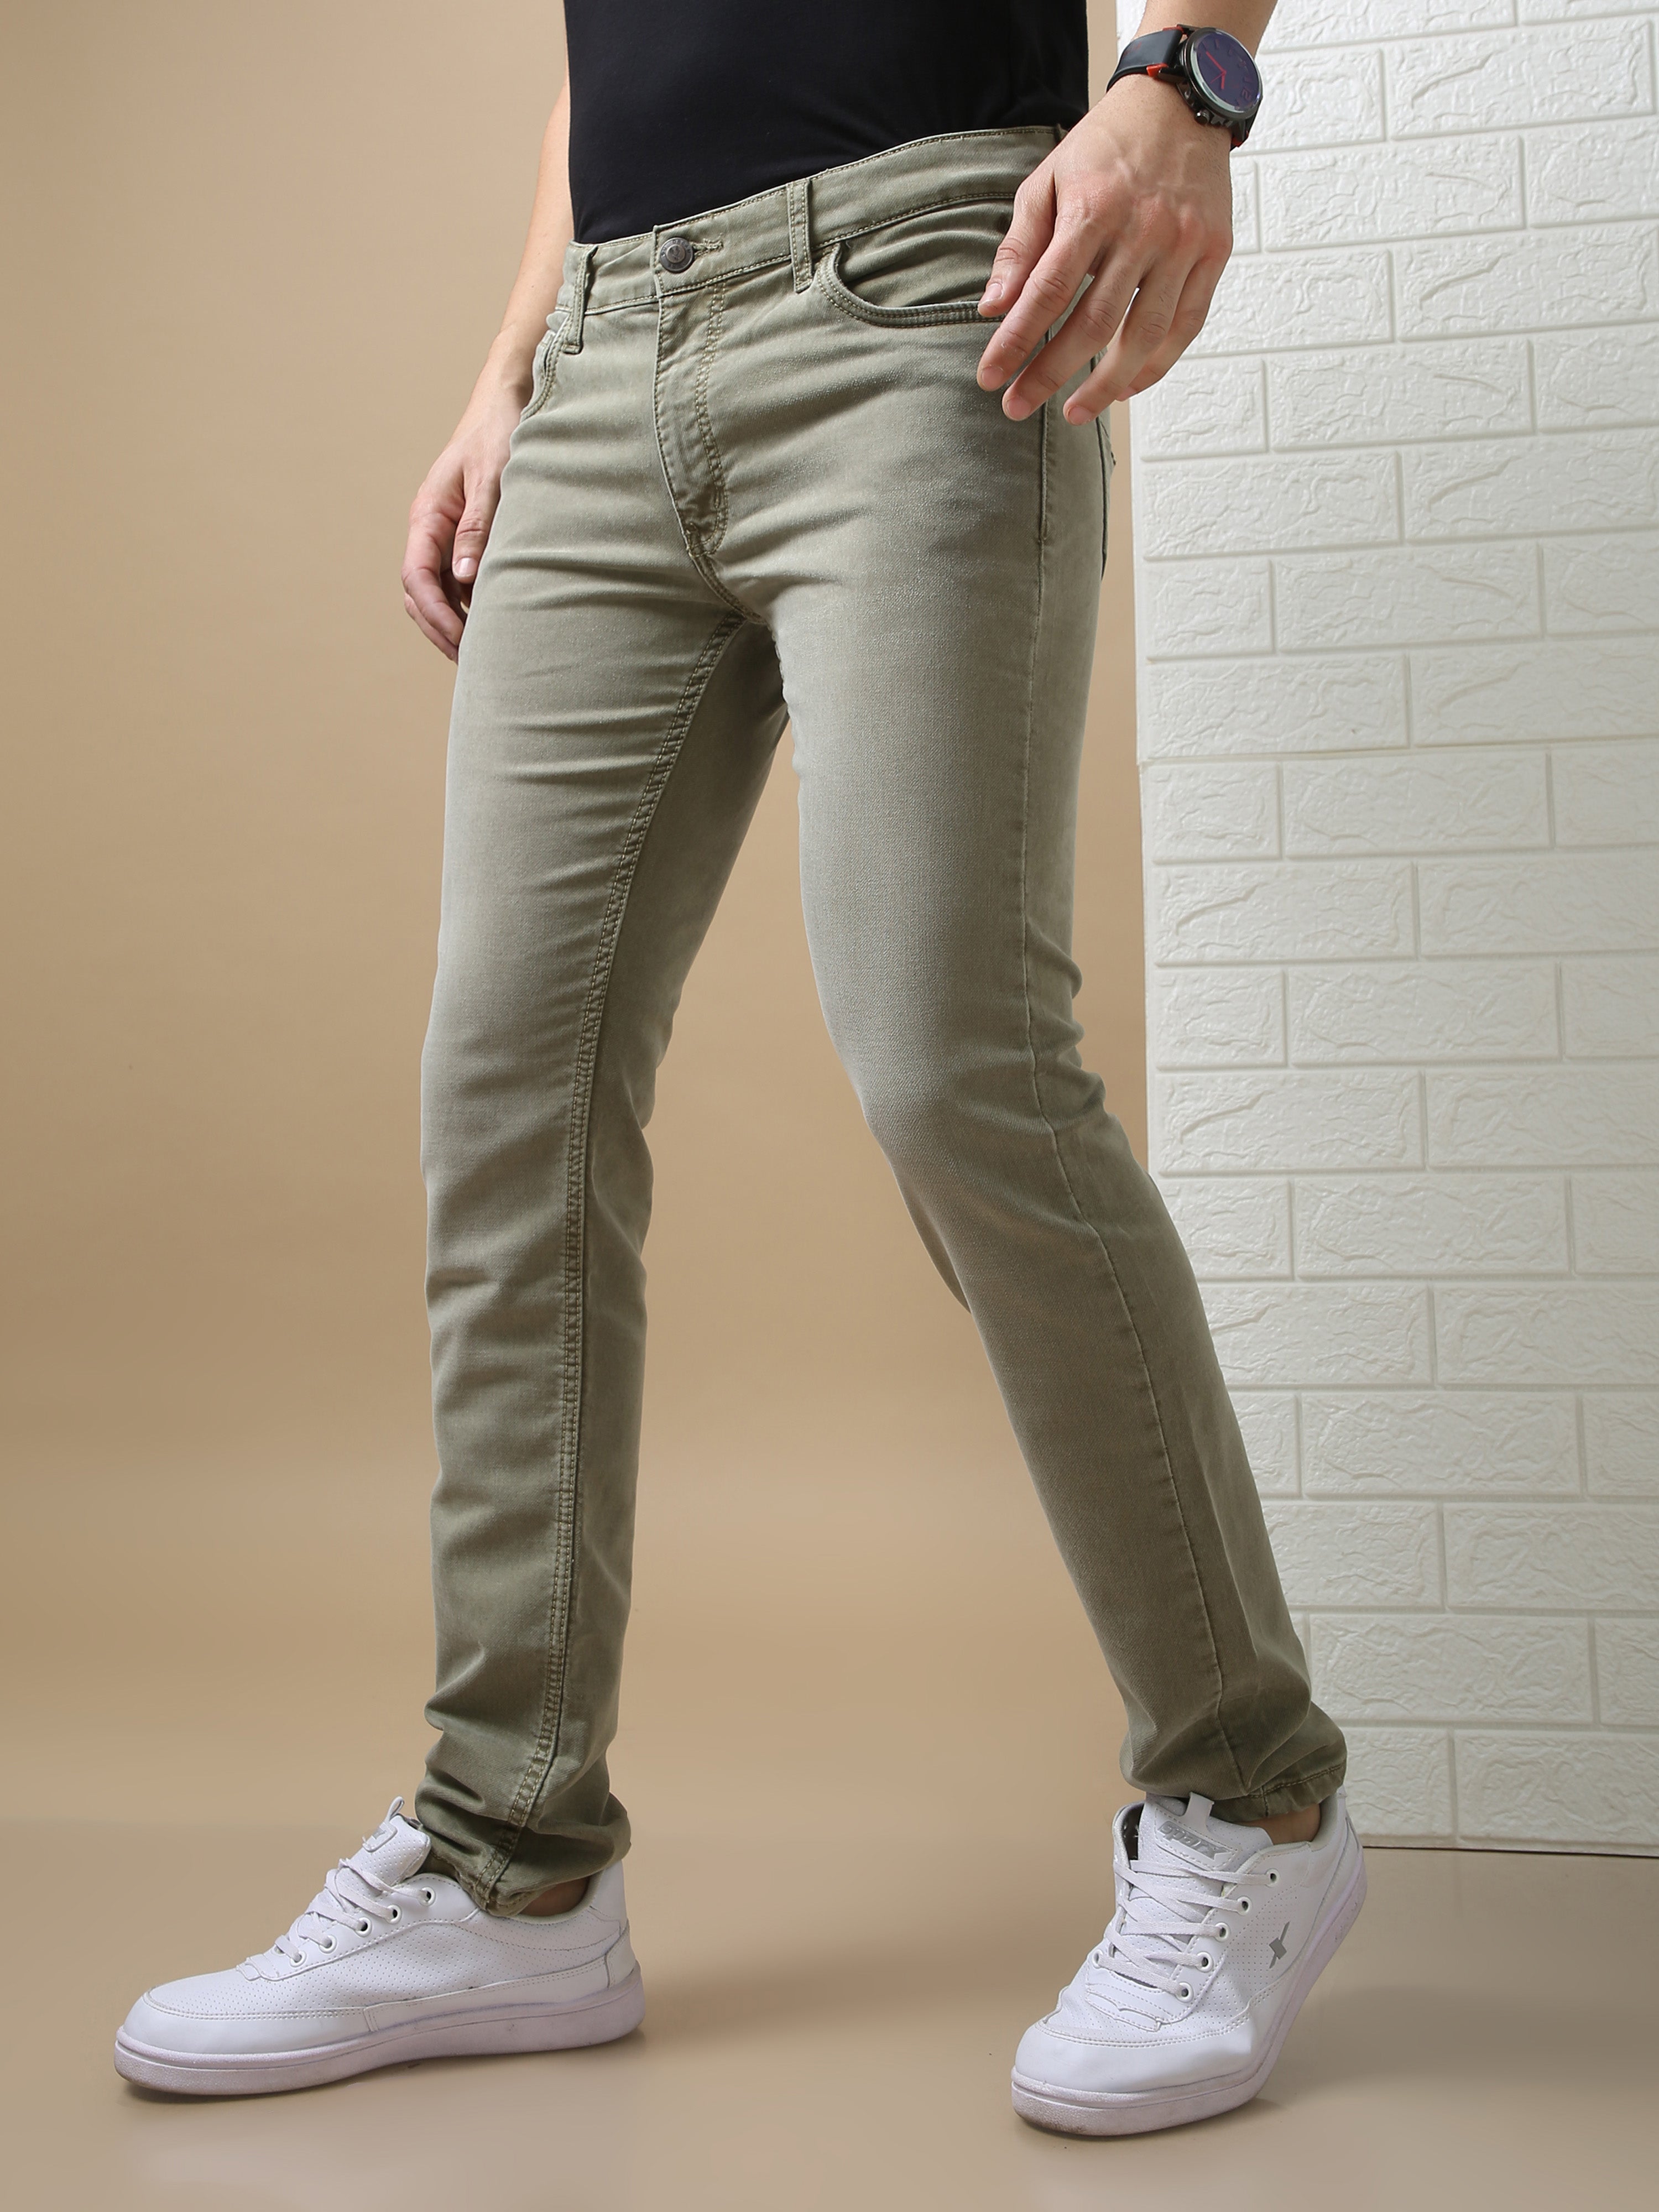 Olive Green Boot-cut Jeans With Zipper Bottom For Mens – Mode De Base Italie